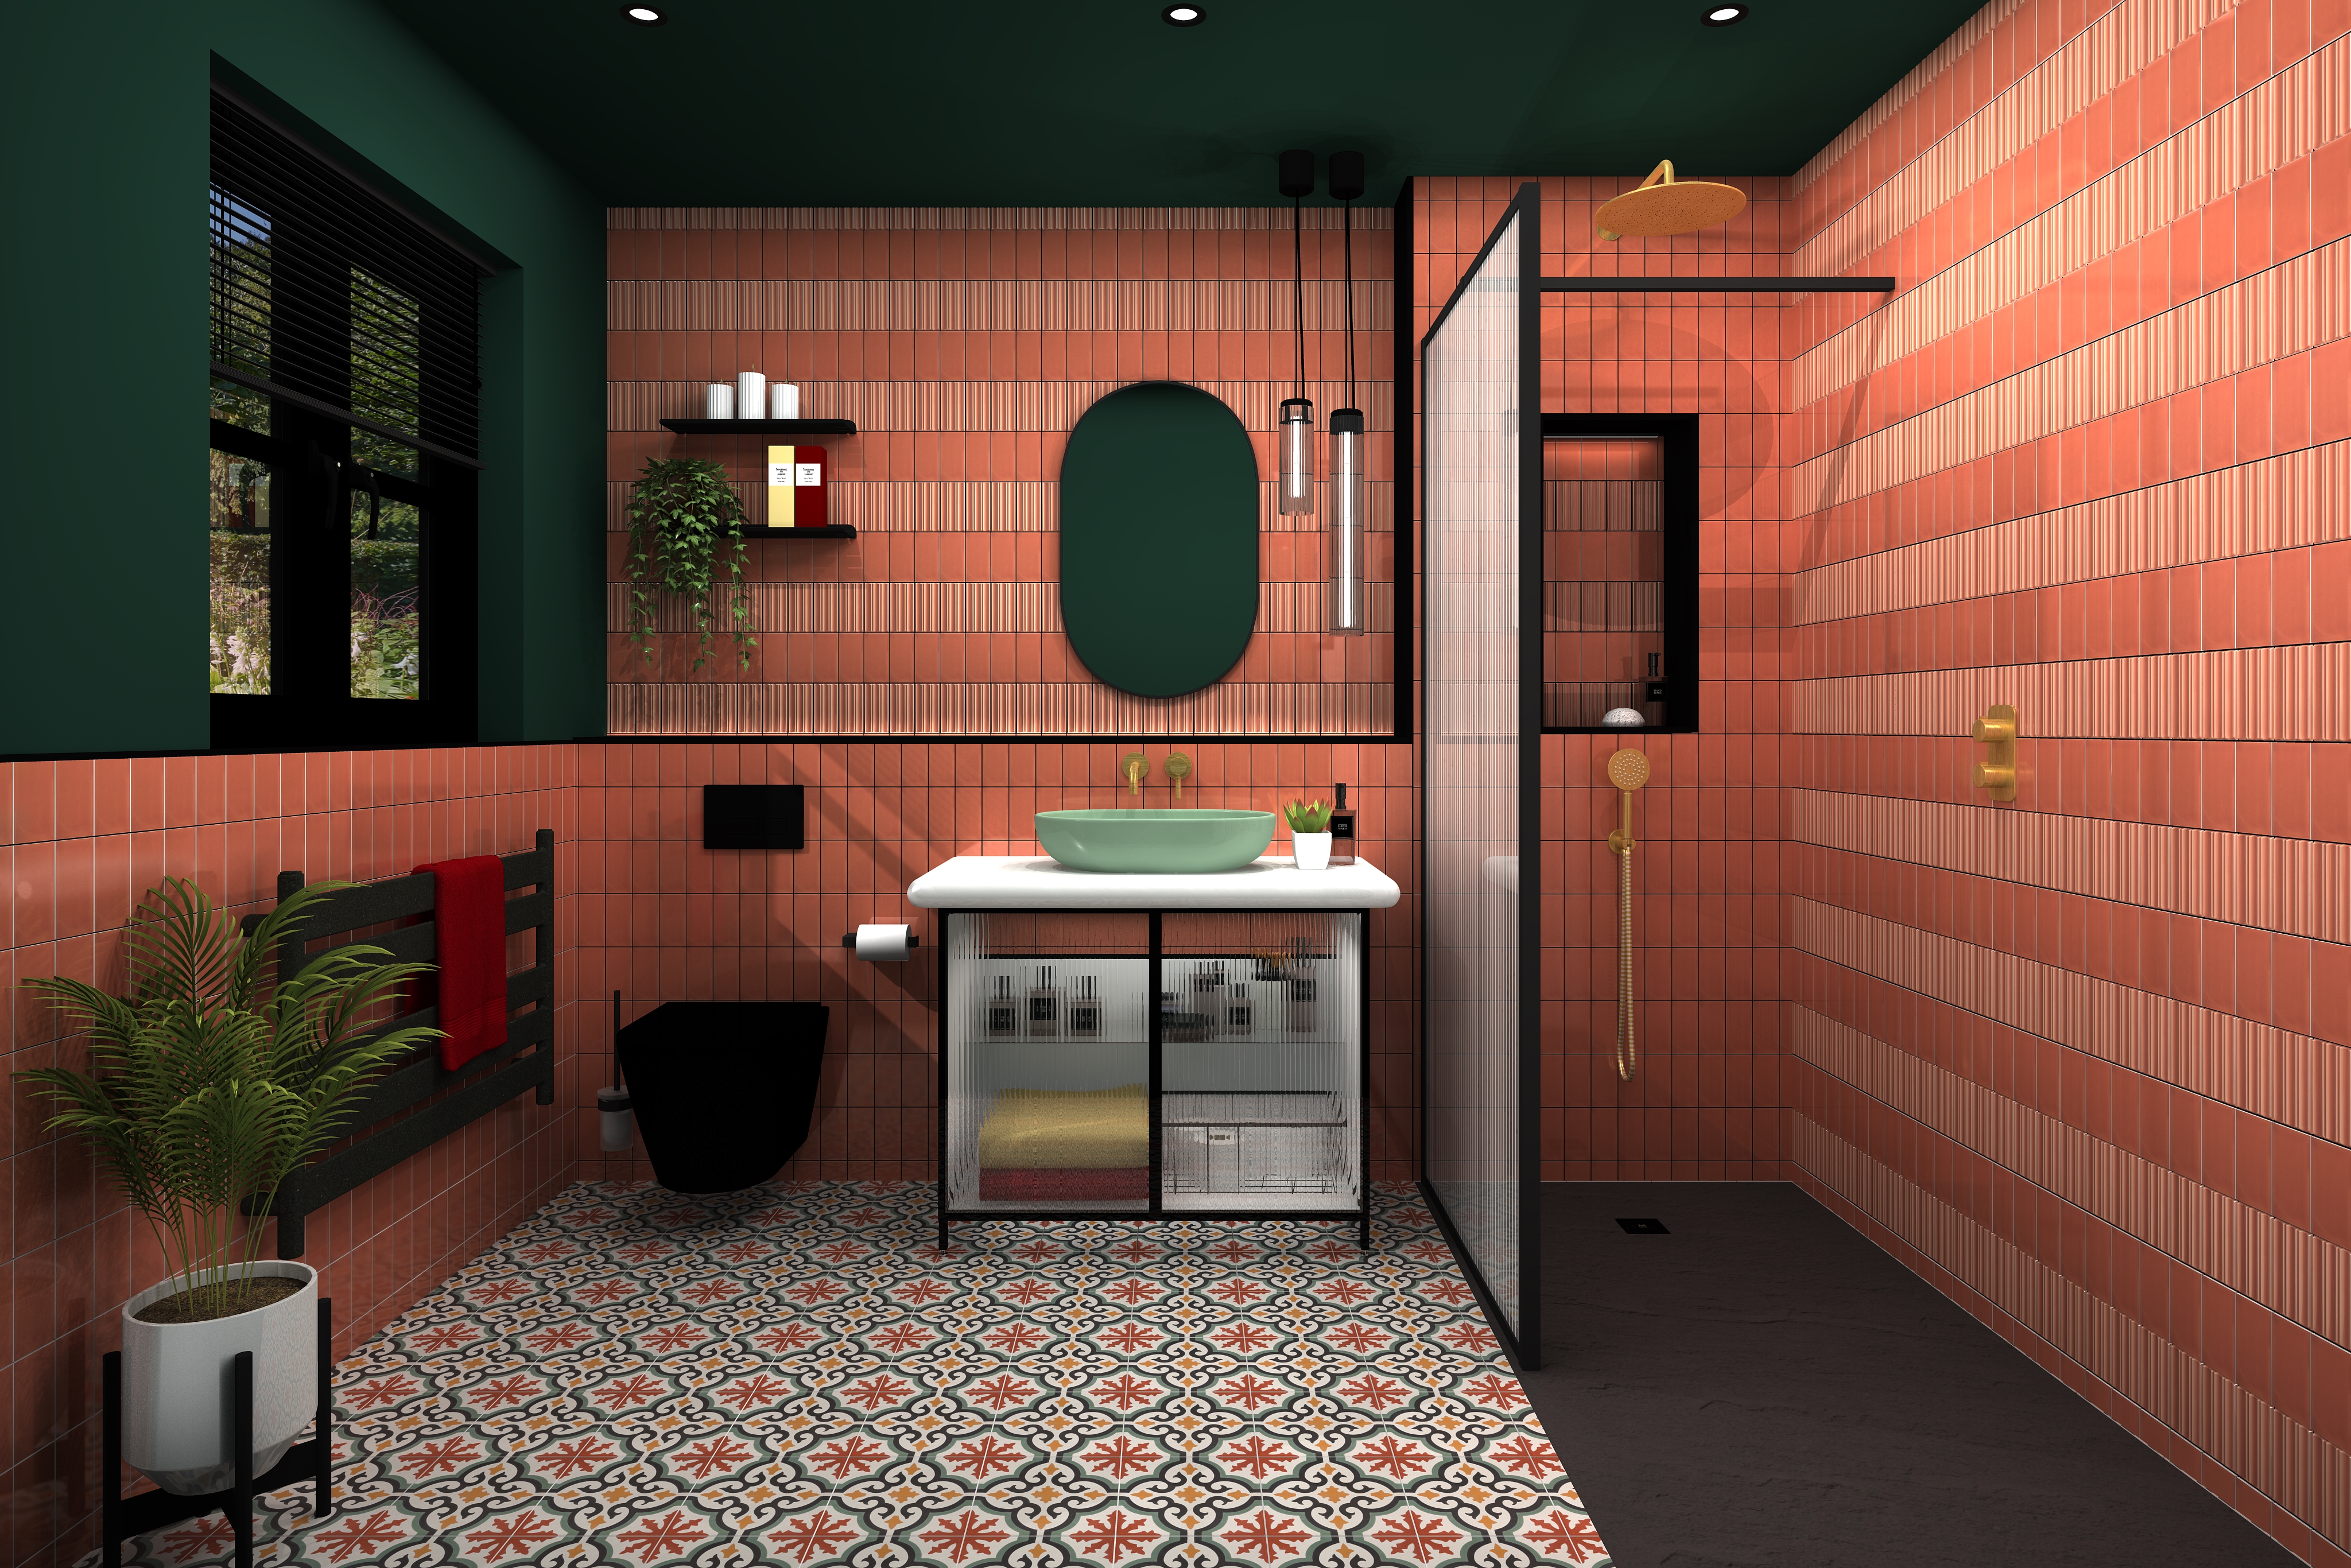 Digital lifestyle image of the Aries inspired bathroom, with terracotta wall tiles, patterned floor tiles, matt black toilet and framed shower enclosure, mint green countertop basin on top of a glass fronted vanity unit, brushed brass basin tap and handshower and a wall mounted capsule mirror